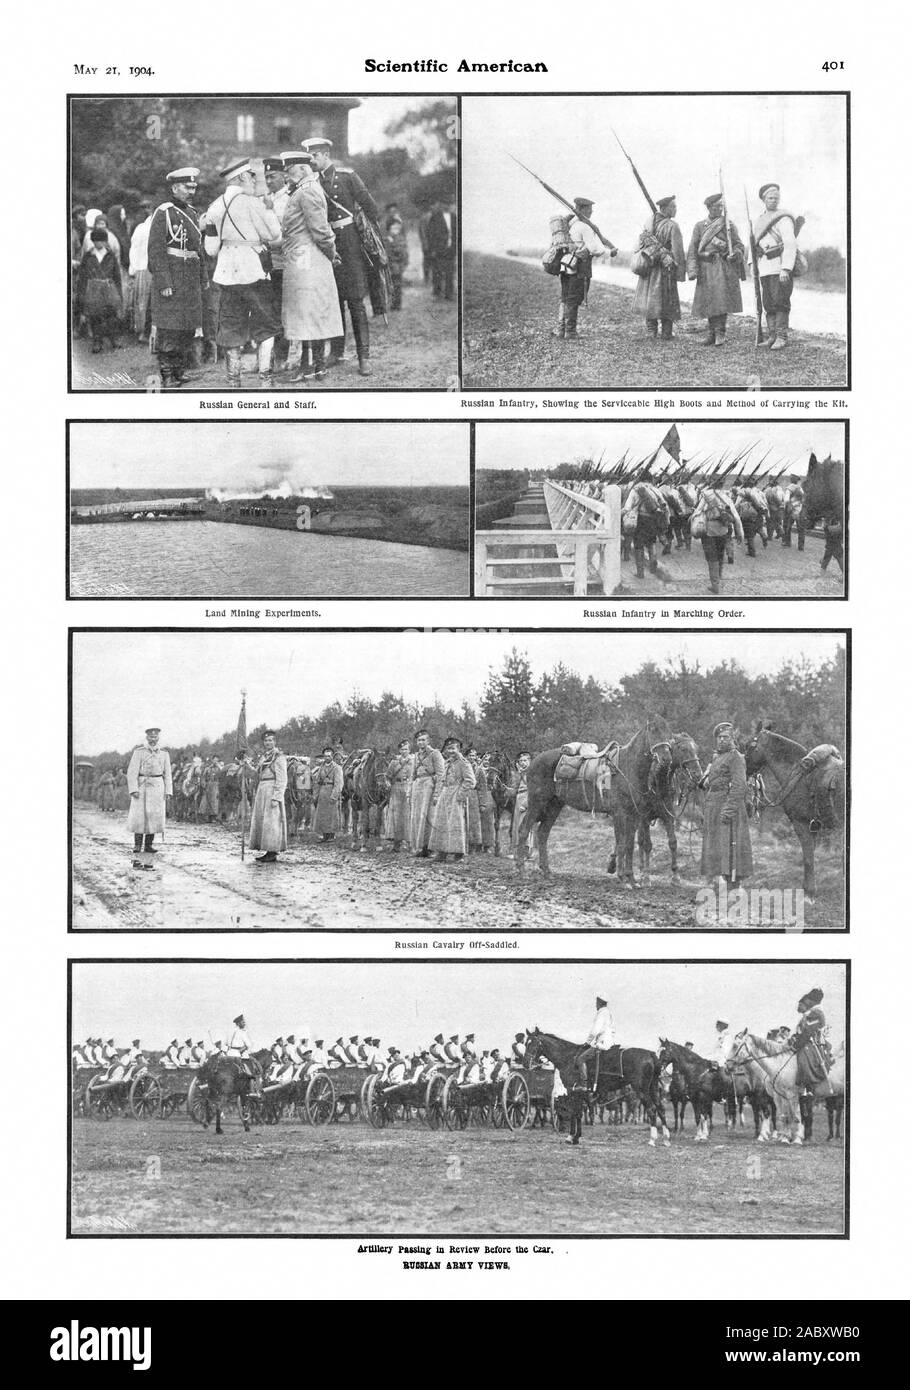 atillery Passing in Review Before the Czar. . RUSSIAN ARMY VIEWS., scientific american, 1904-05-21 Stock Photo